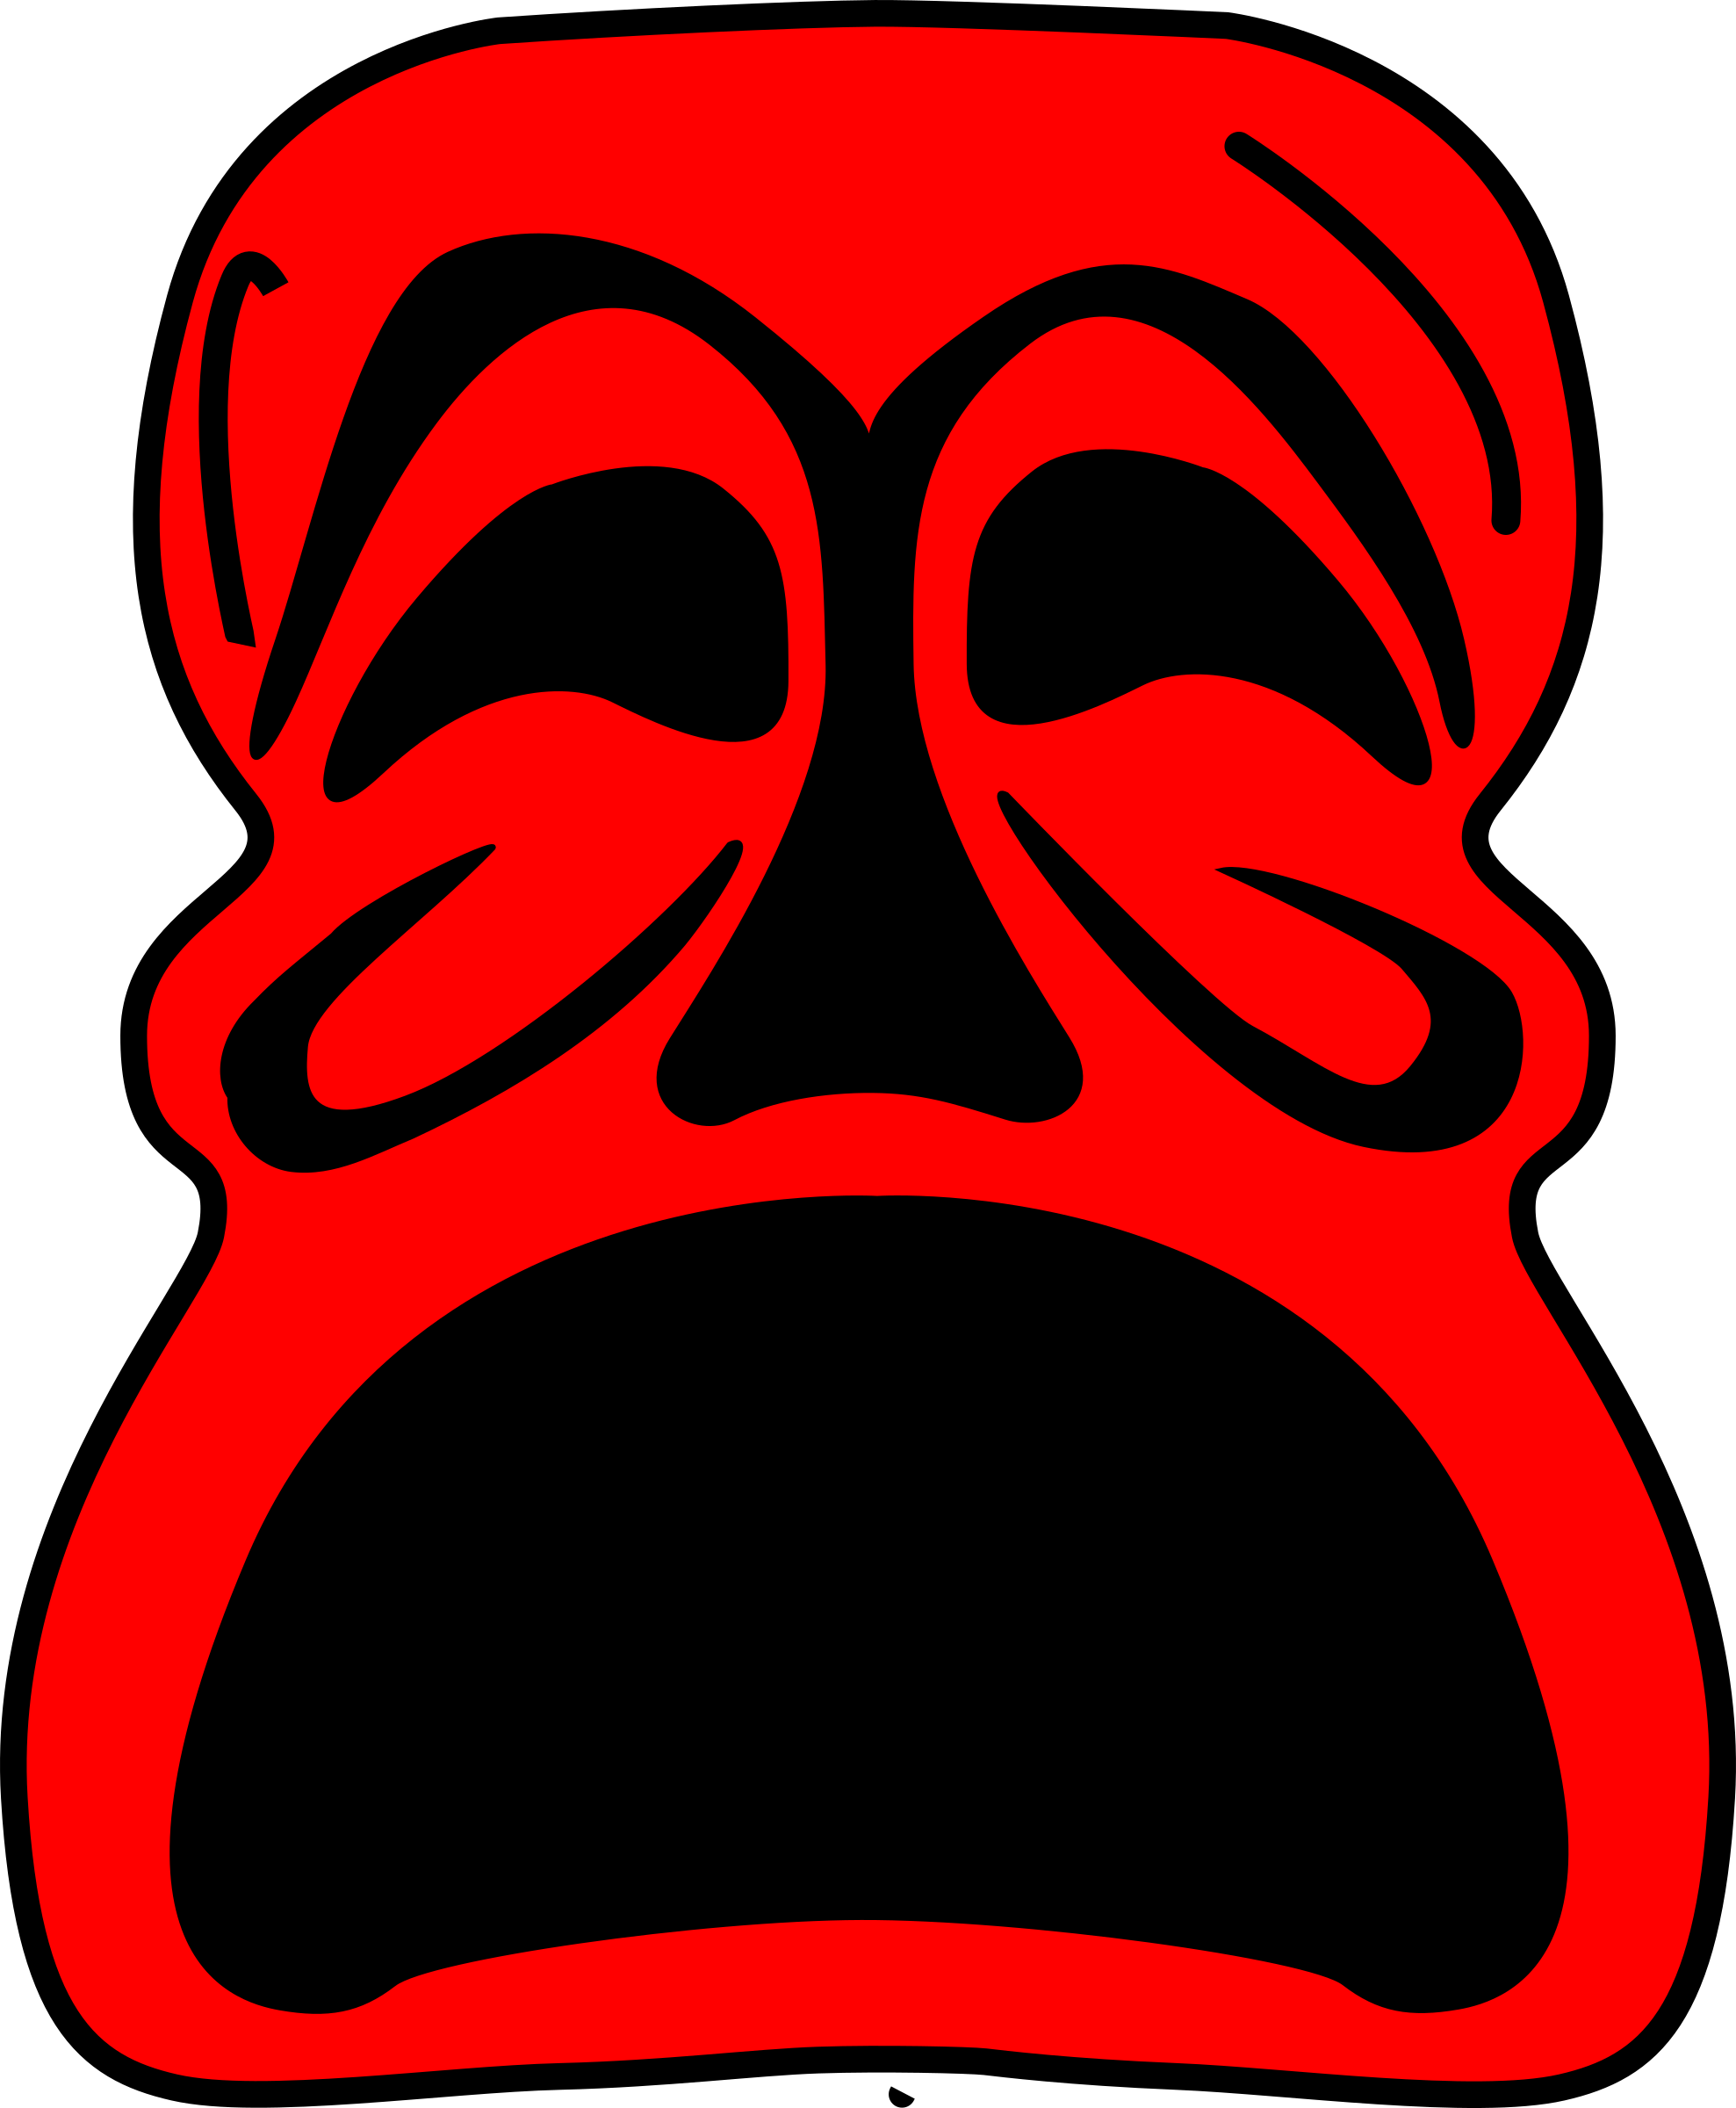 Mask clipart red, Mask red Transparent FREE for download on ...